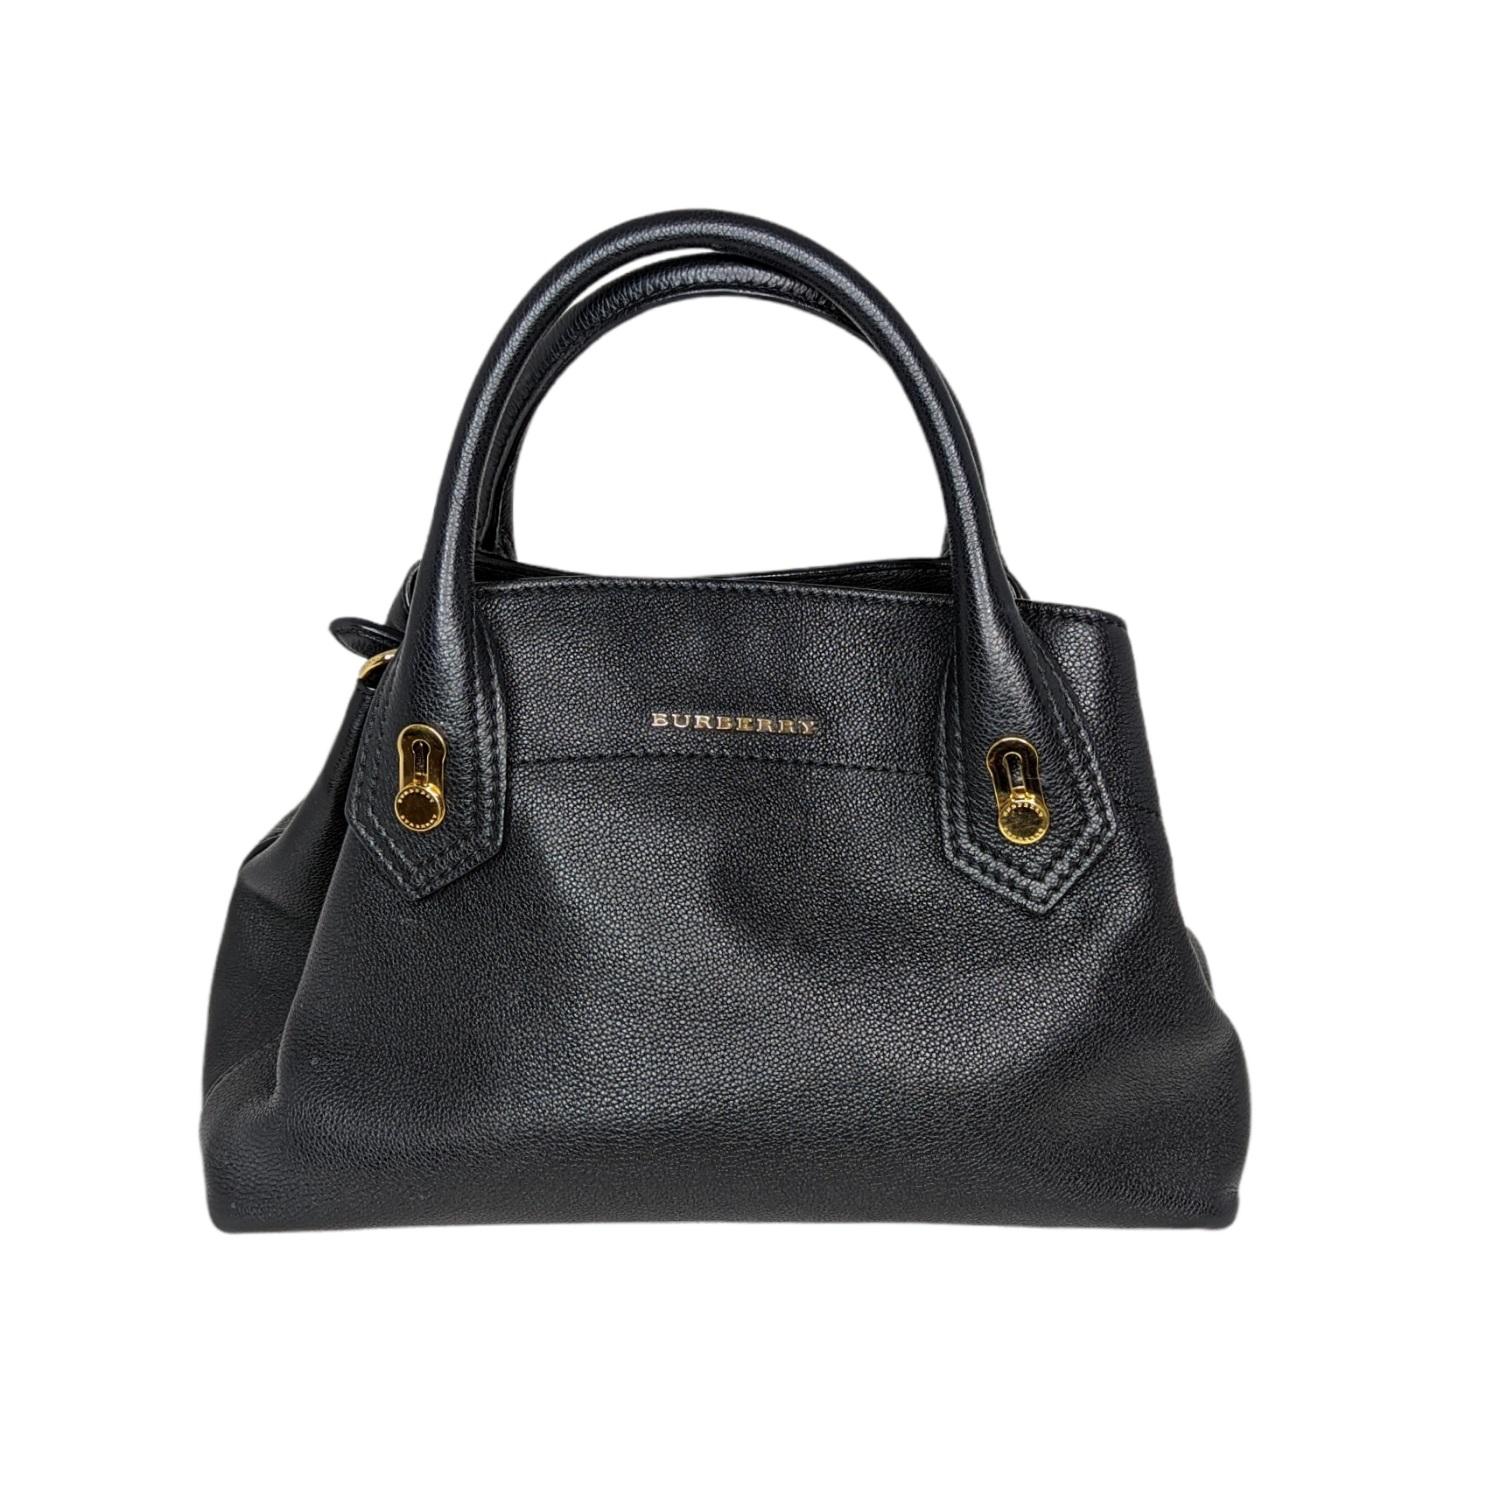 This stylish tote is beautifully crafted of pebbled calfskin leather in black. The bag features a black leather shoulder strap, a black leather top handles and gold hardware. The handbag opens to a house check with a flat pocket and central zipper